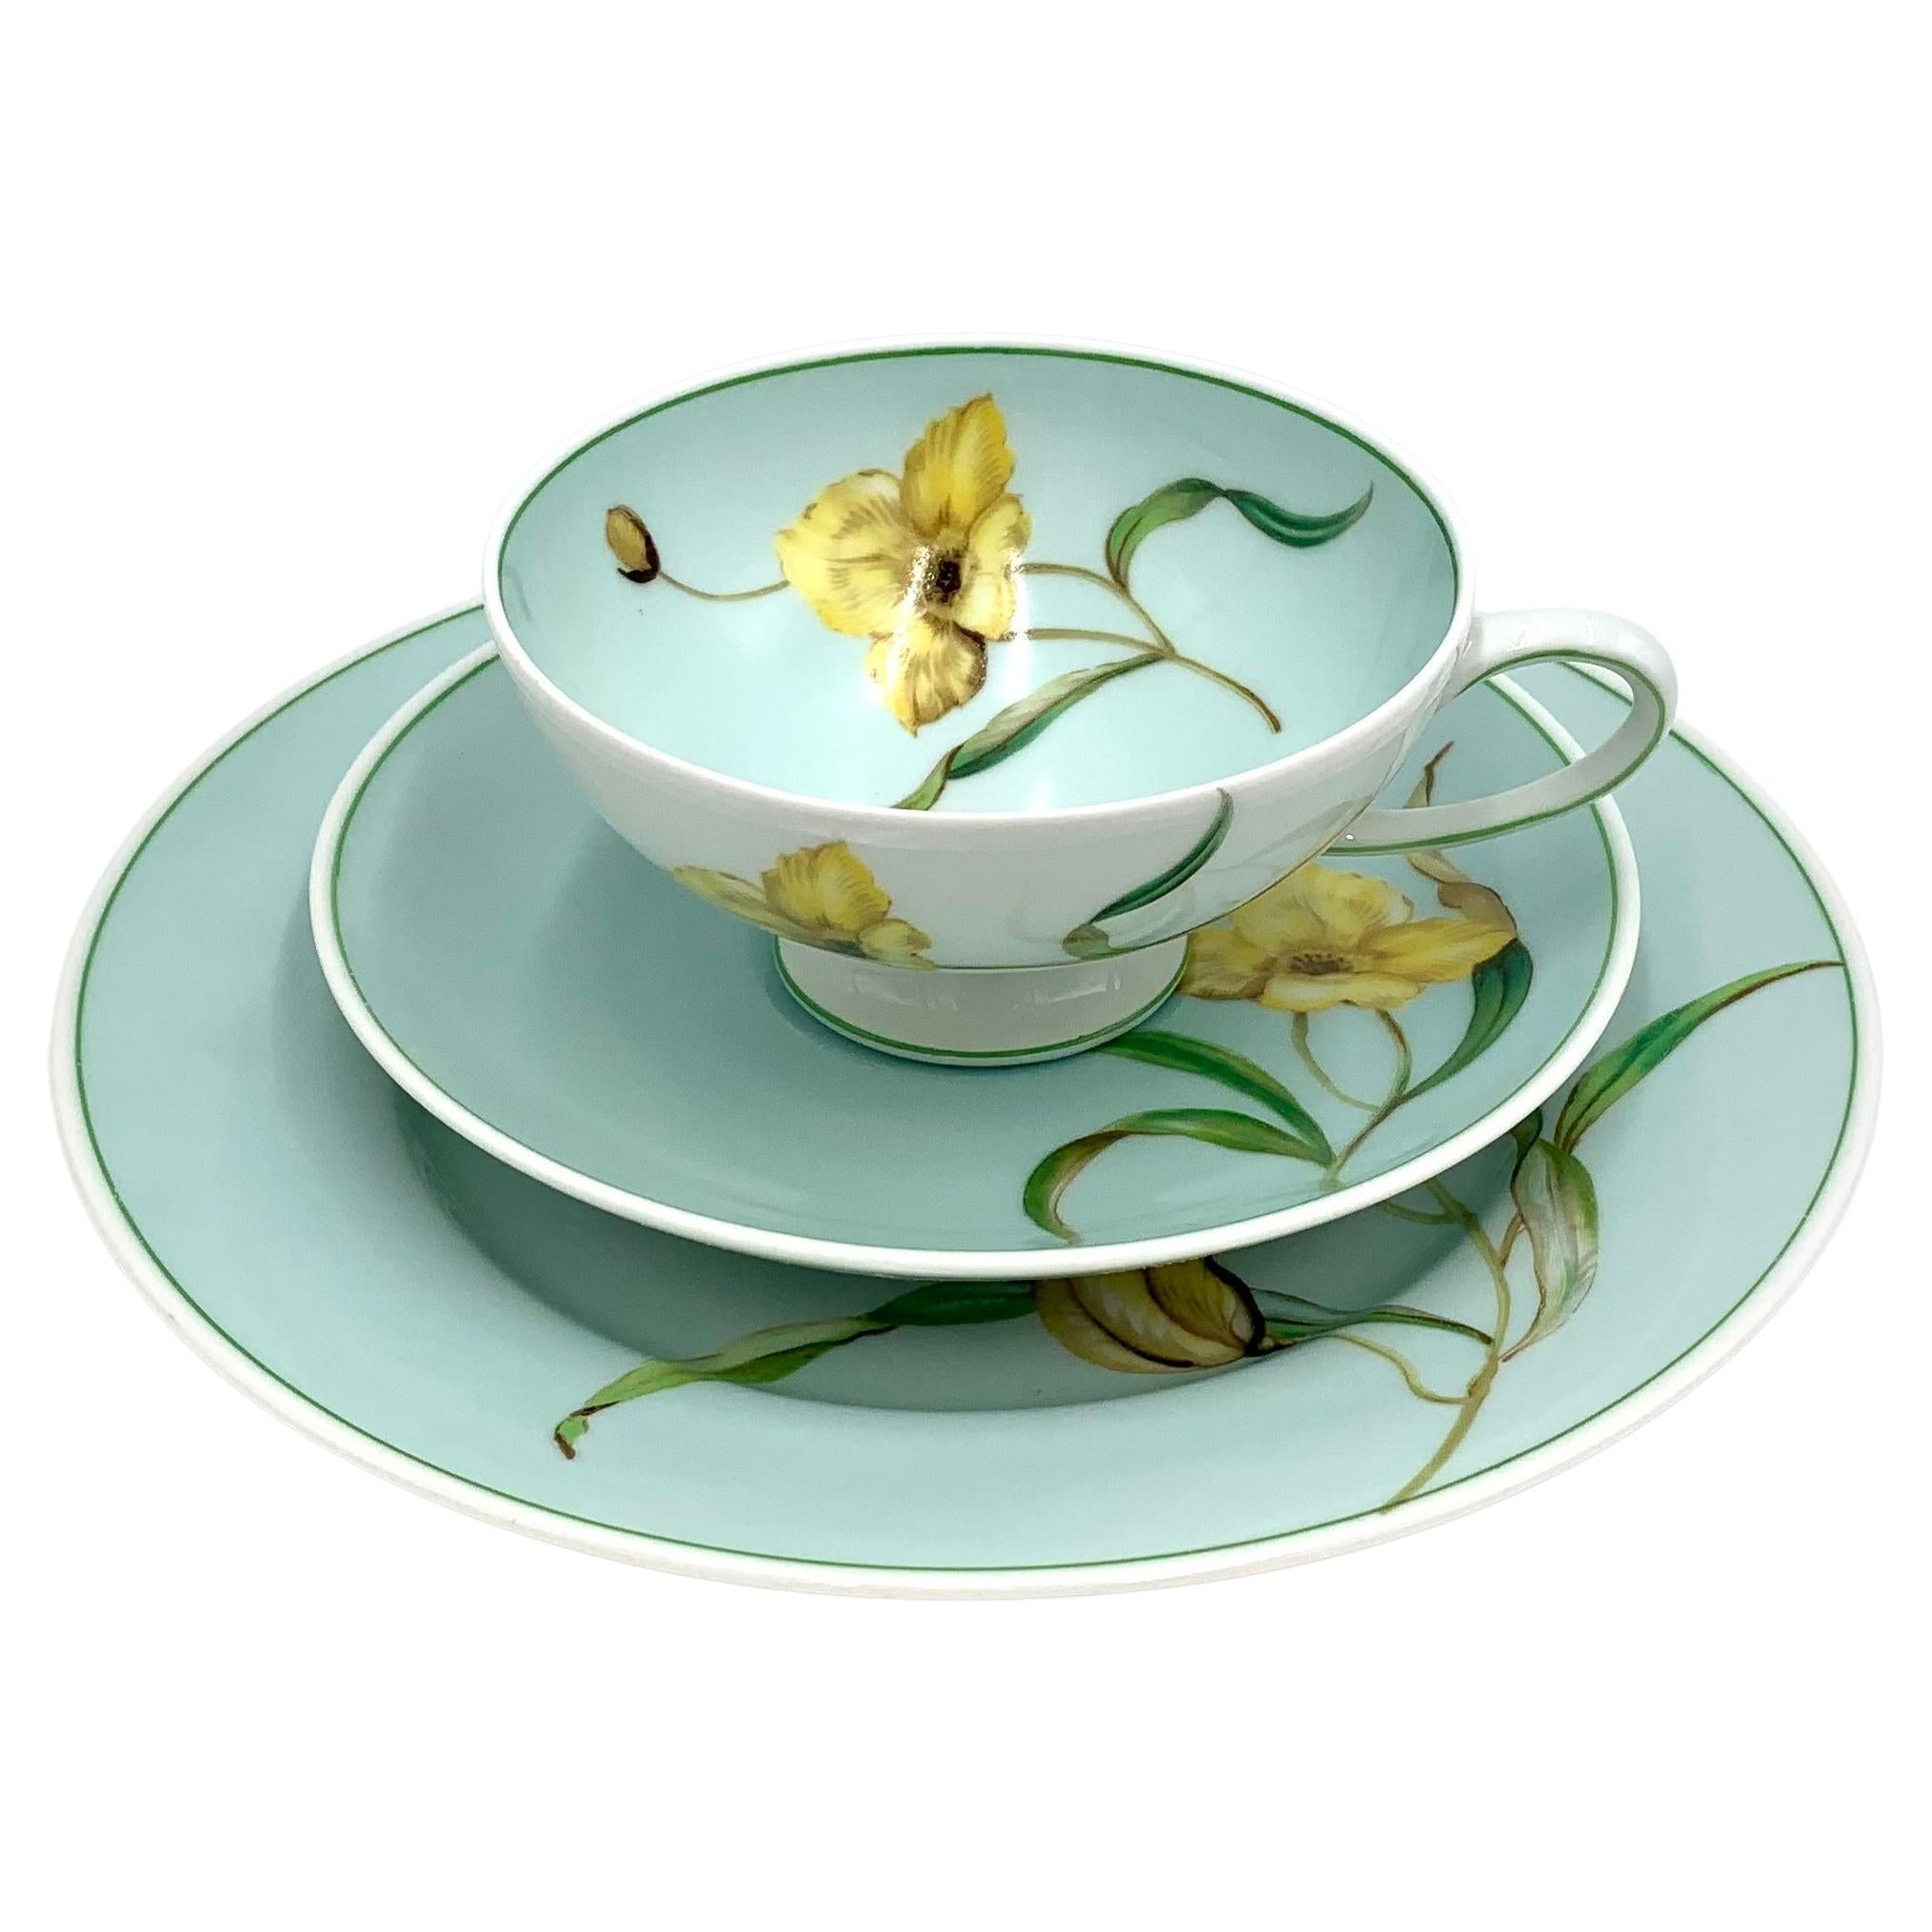 A beautiful blue breakfast set with a yellow daffodil flower motif. Signed Rosenthal, Selb-Germany. Without damages

Measures: Plate: diameter 20 cm

Stand: diameter 15 cm

A cup: height 5.5 cm, diameter 10 cm.